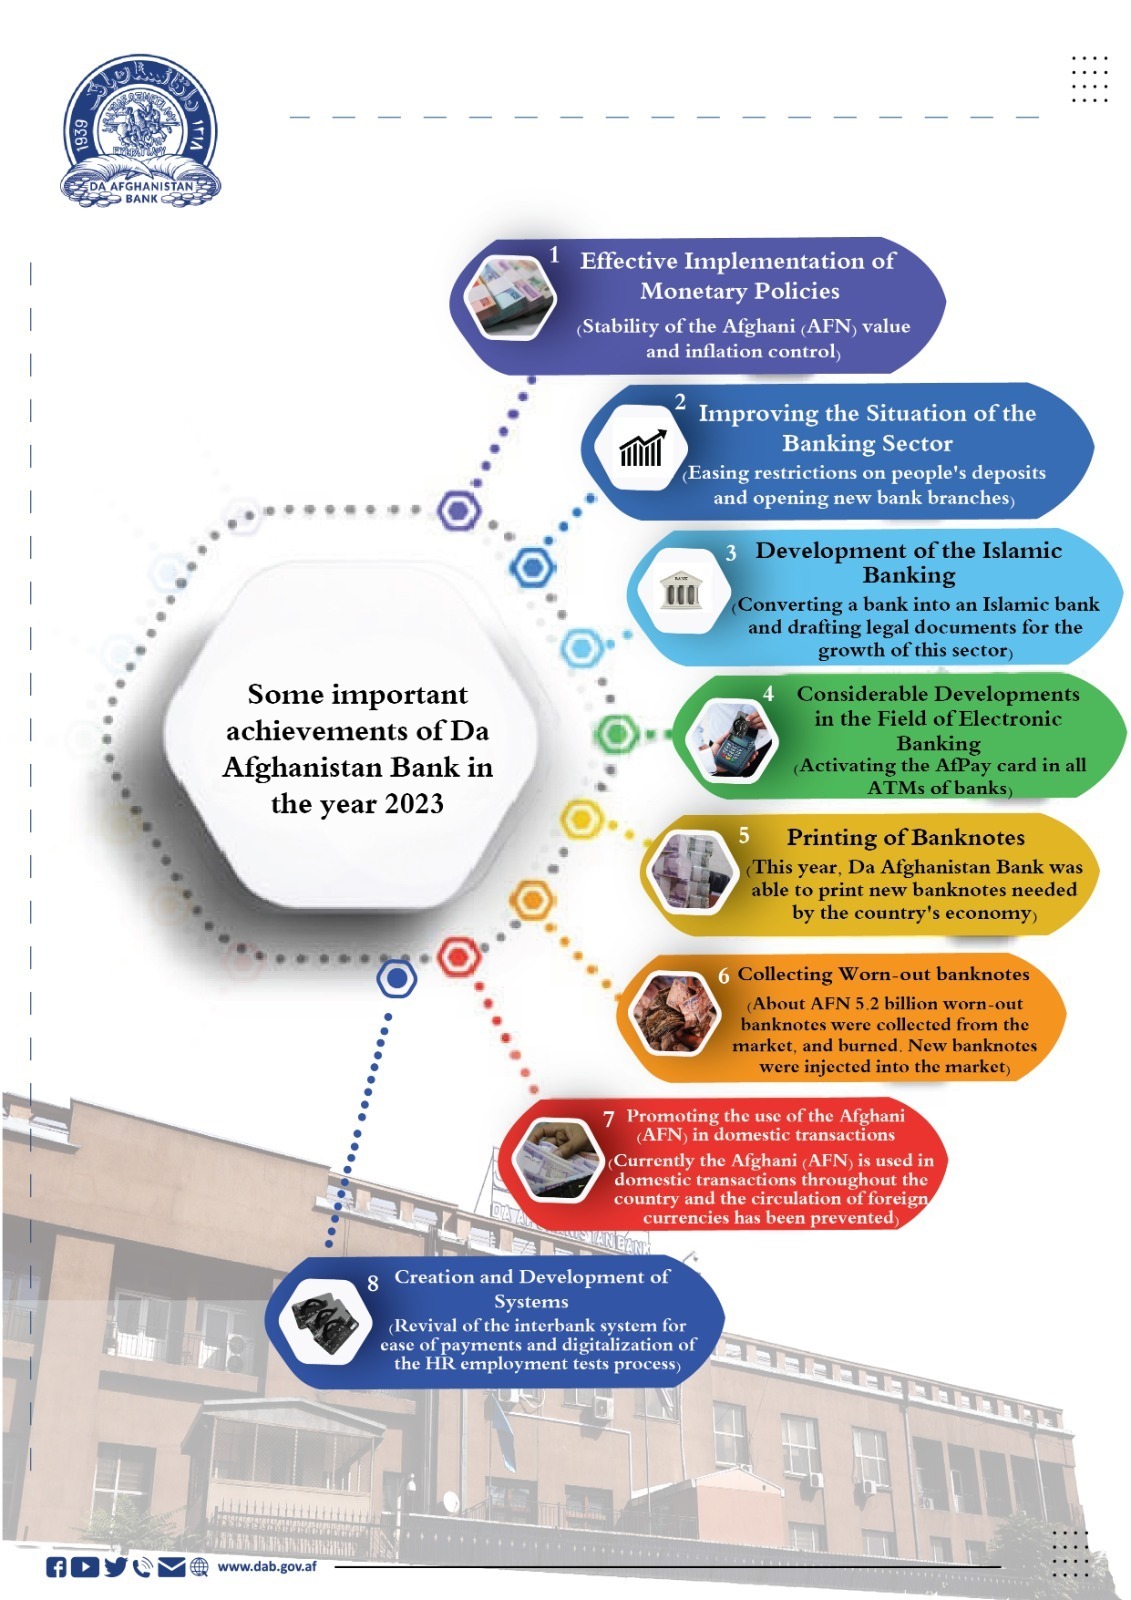 Some important achievement of Da Afghanistan Bank in the Year 2023